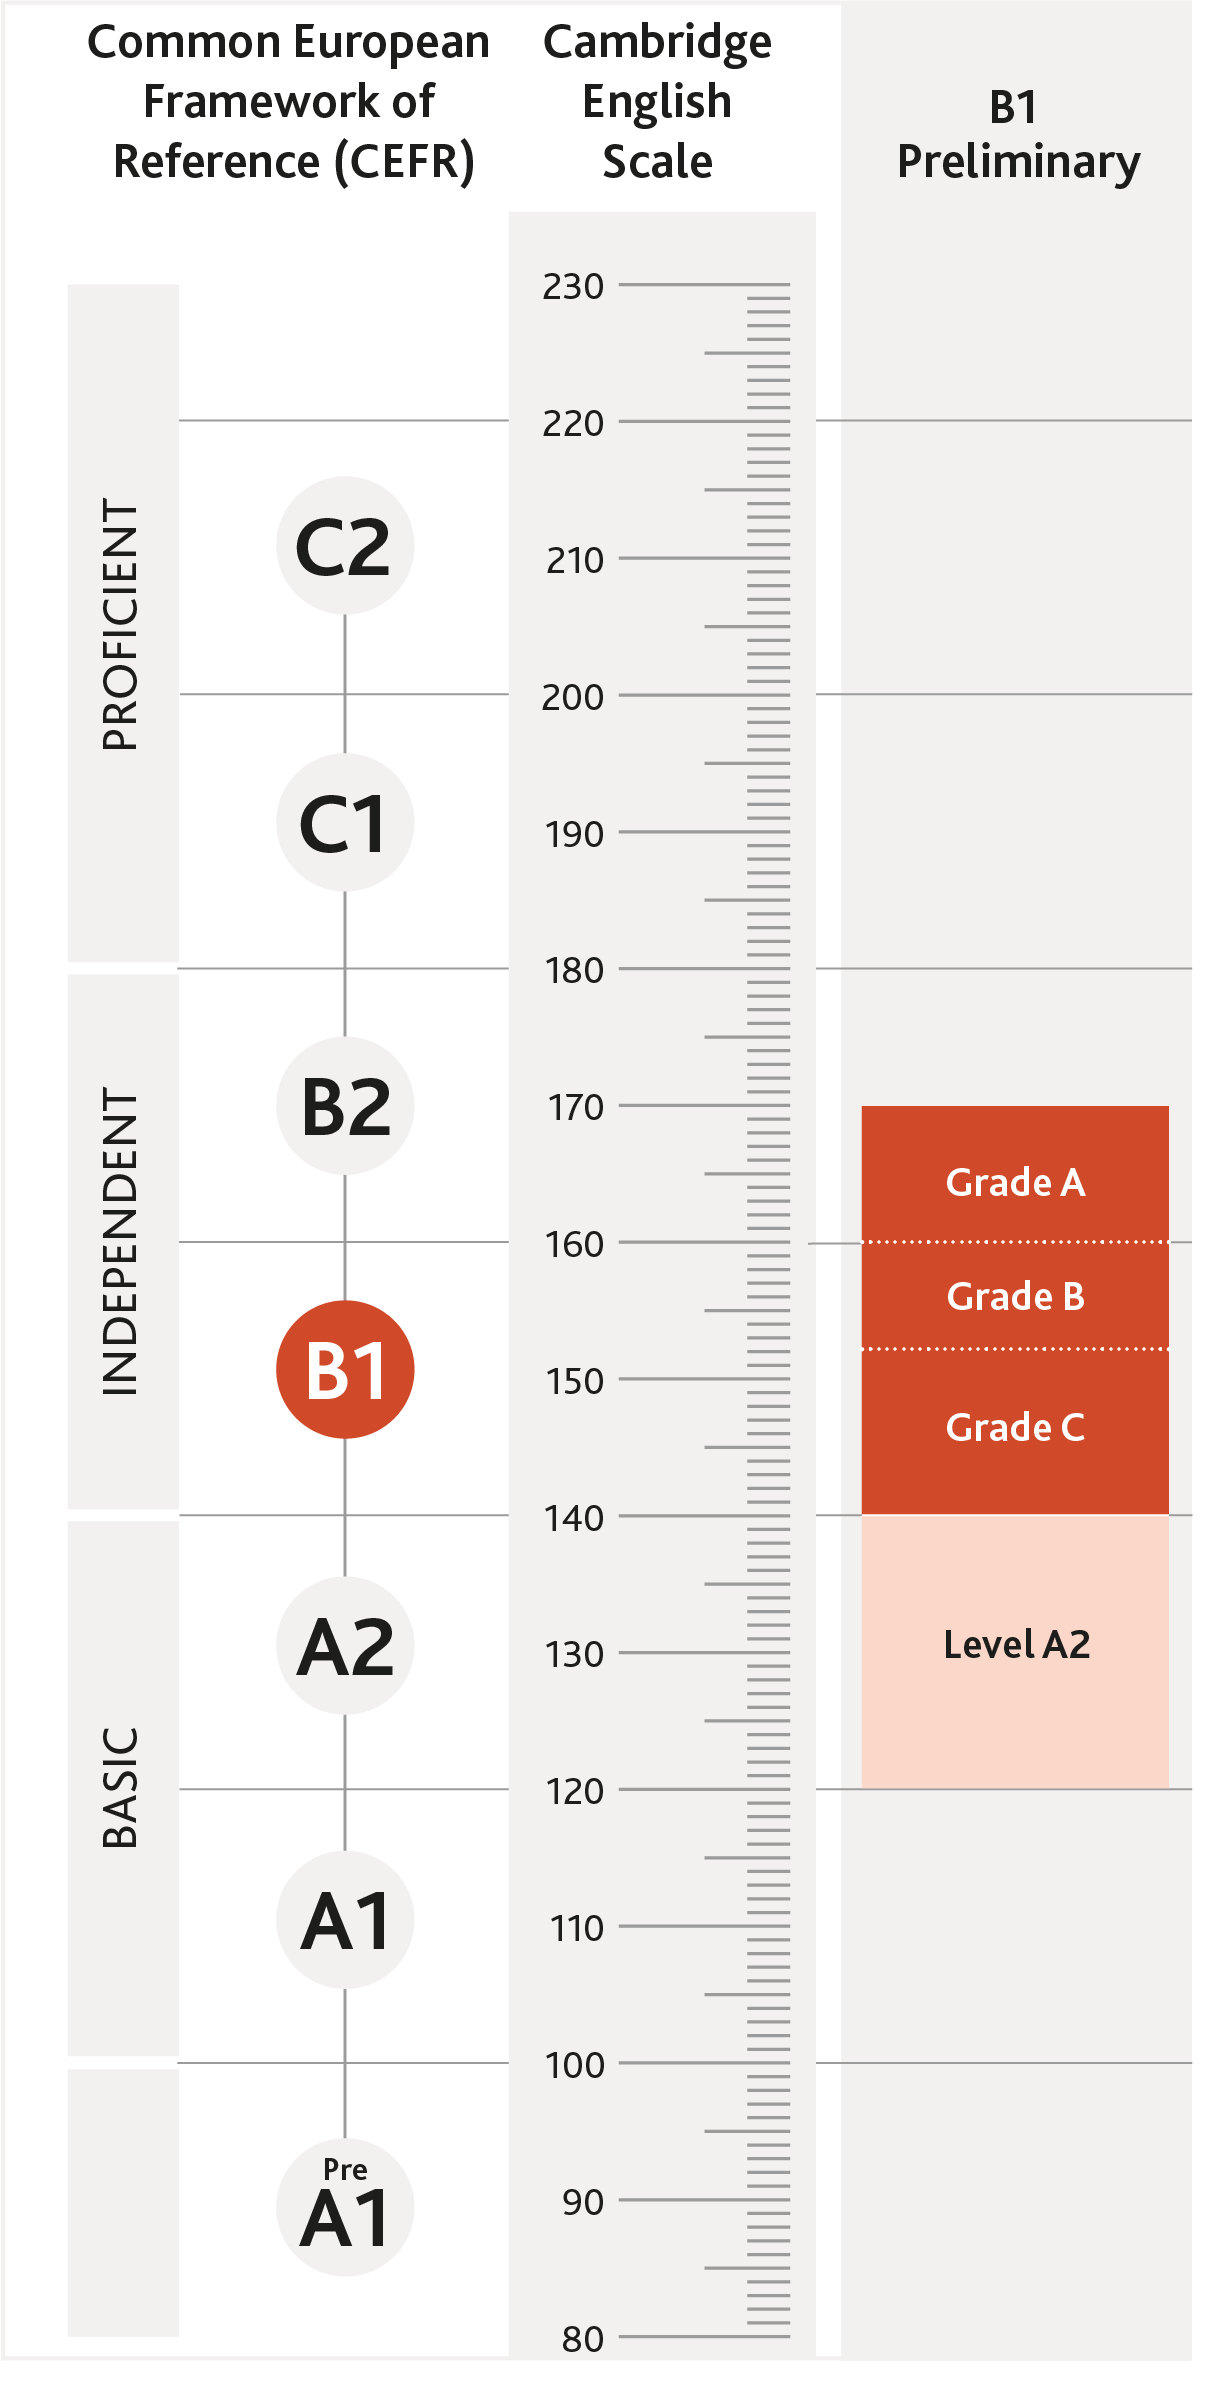 Diagram of where B1 Preliminary is aligned on the CEFR and the Cambridge English Scale